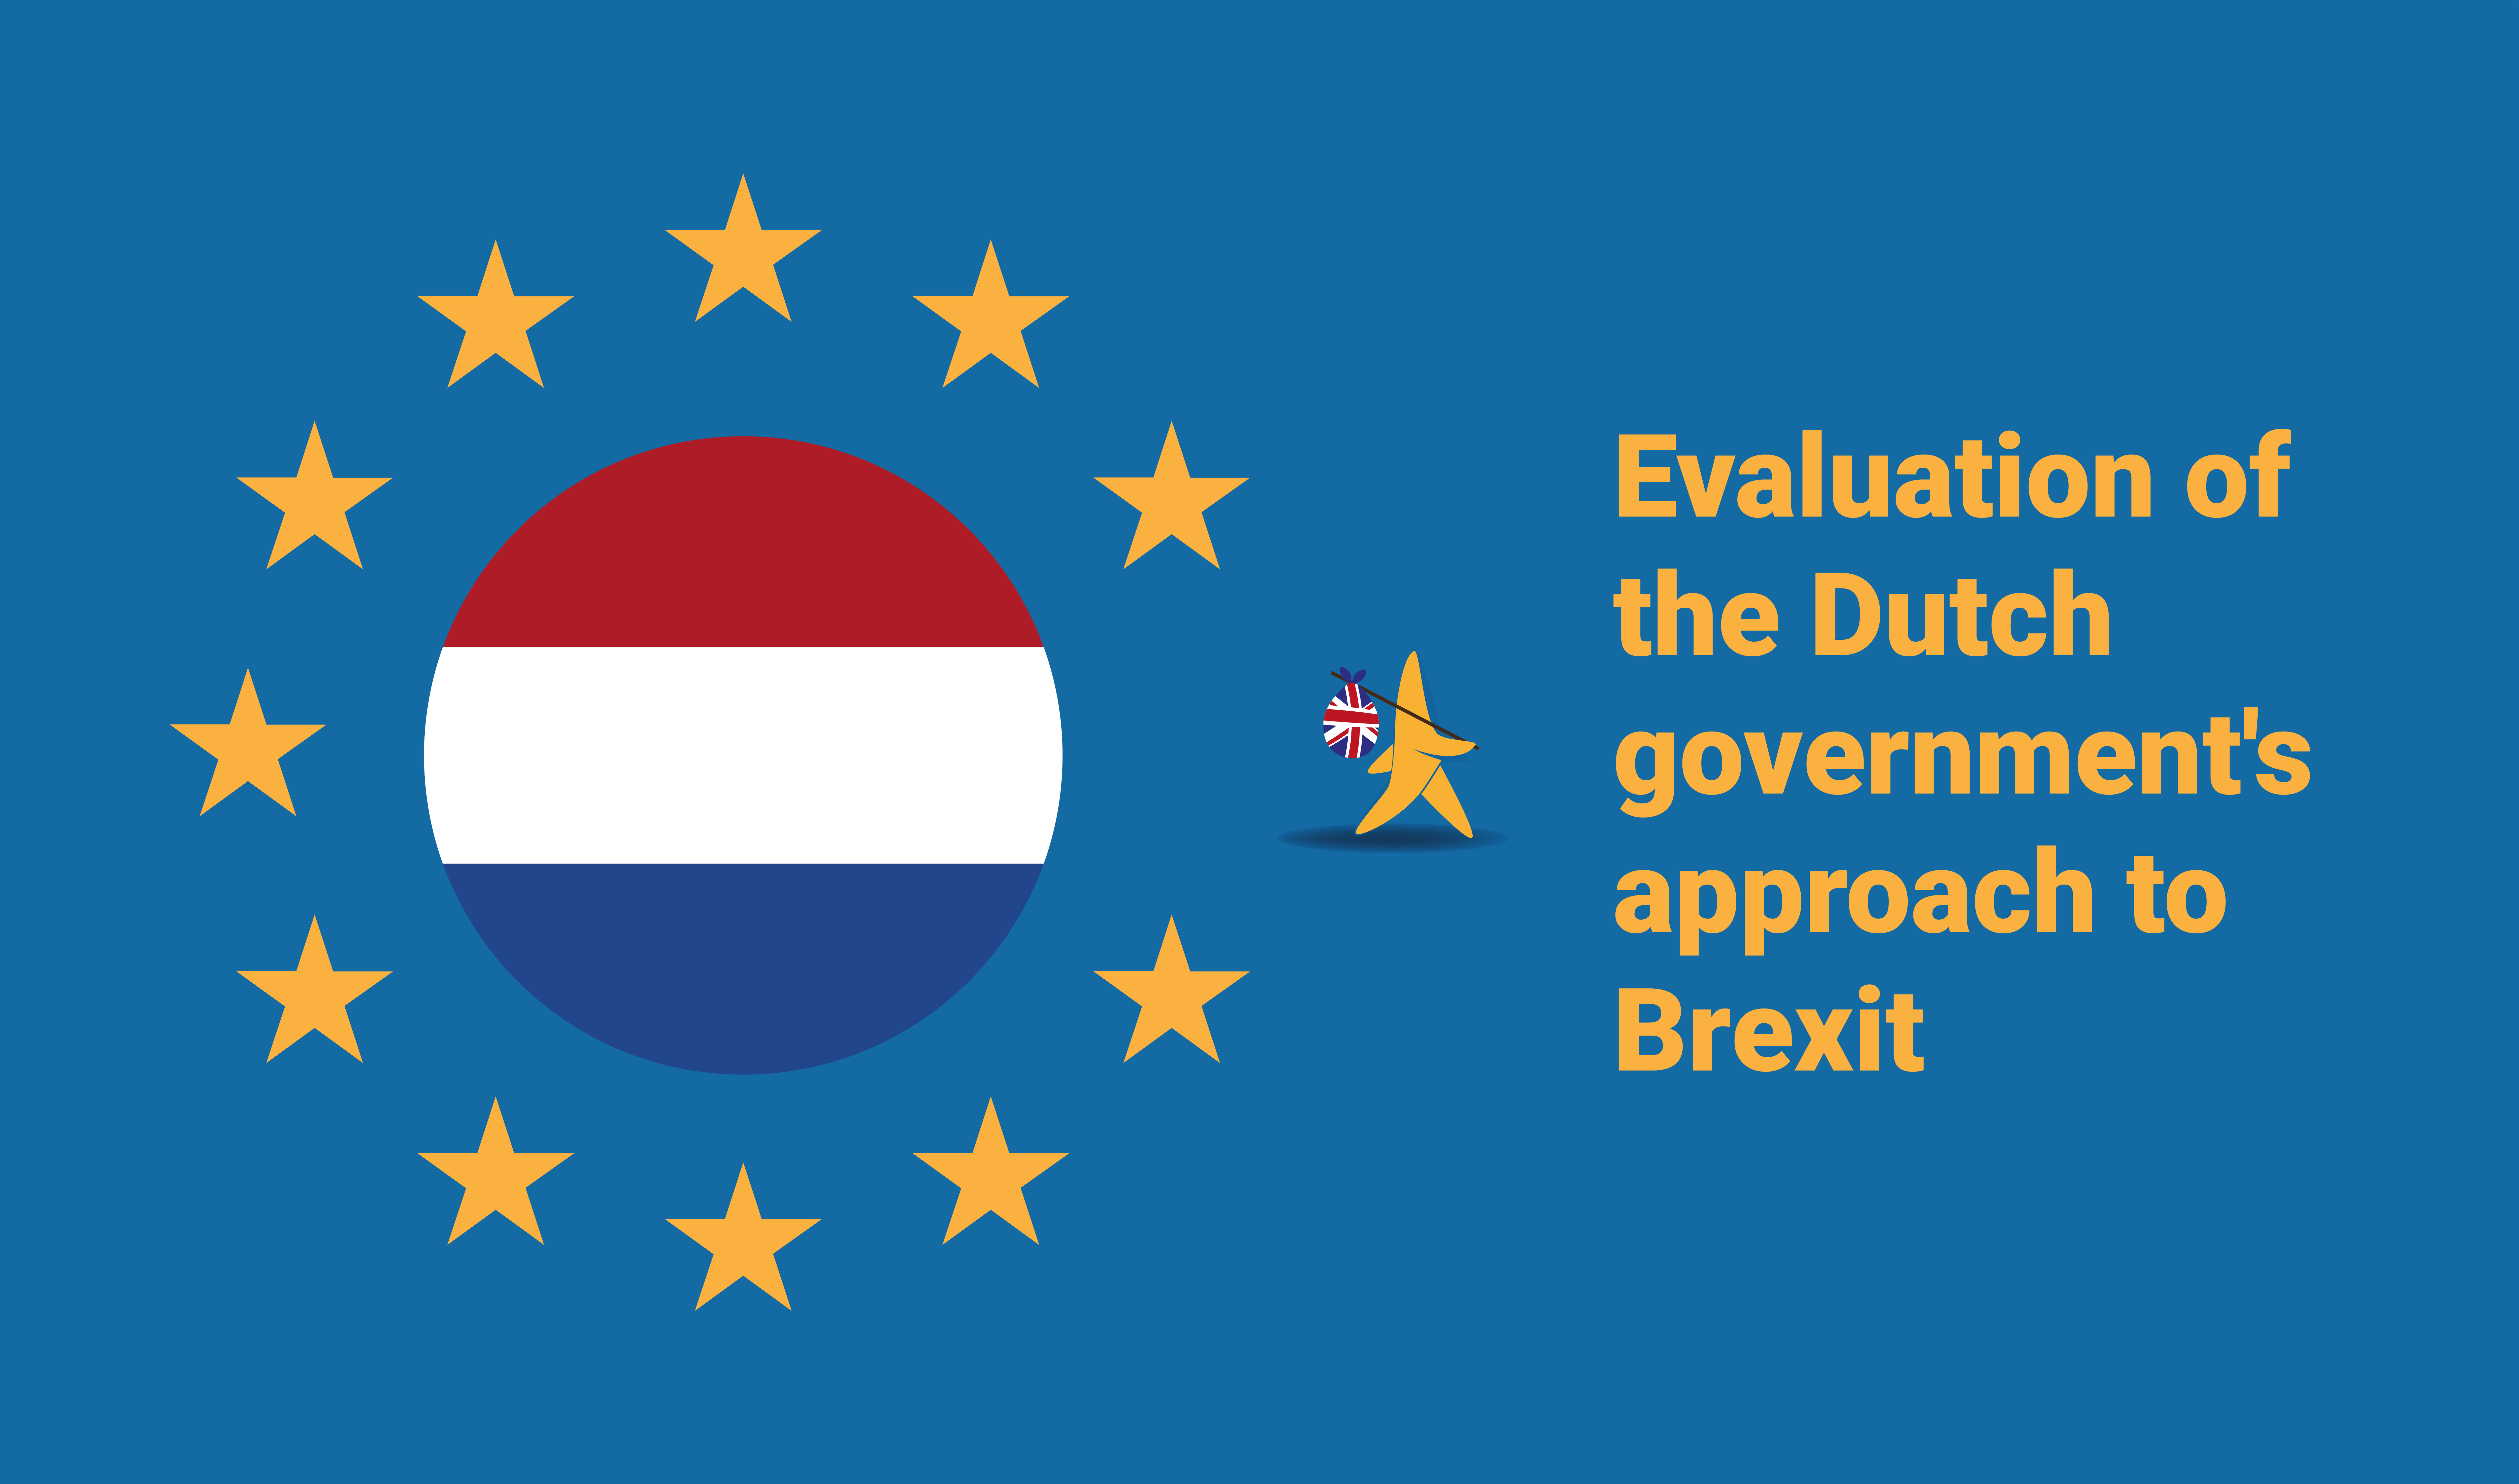 Evaluation of the Dutch government's approach to Brexit